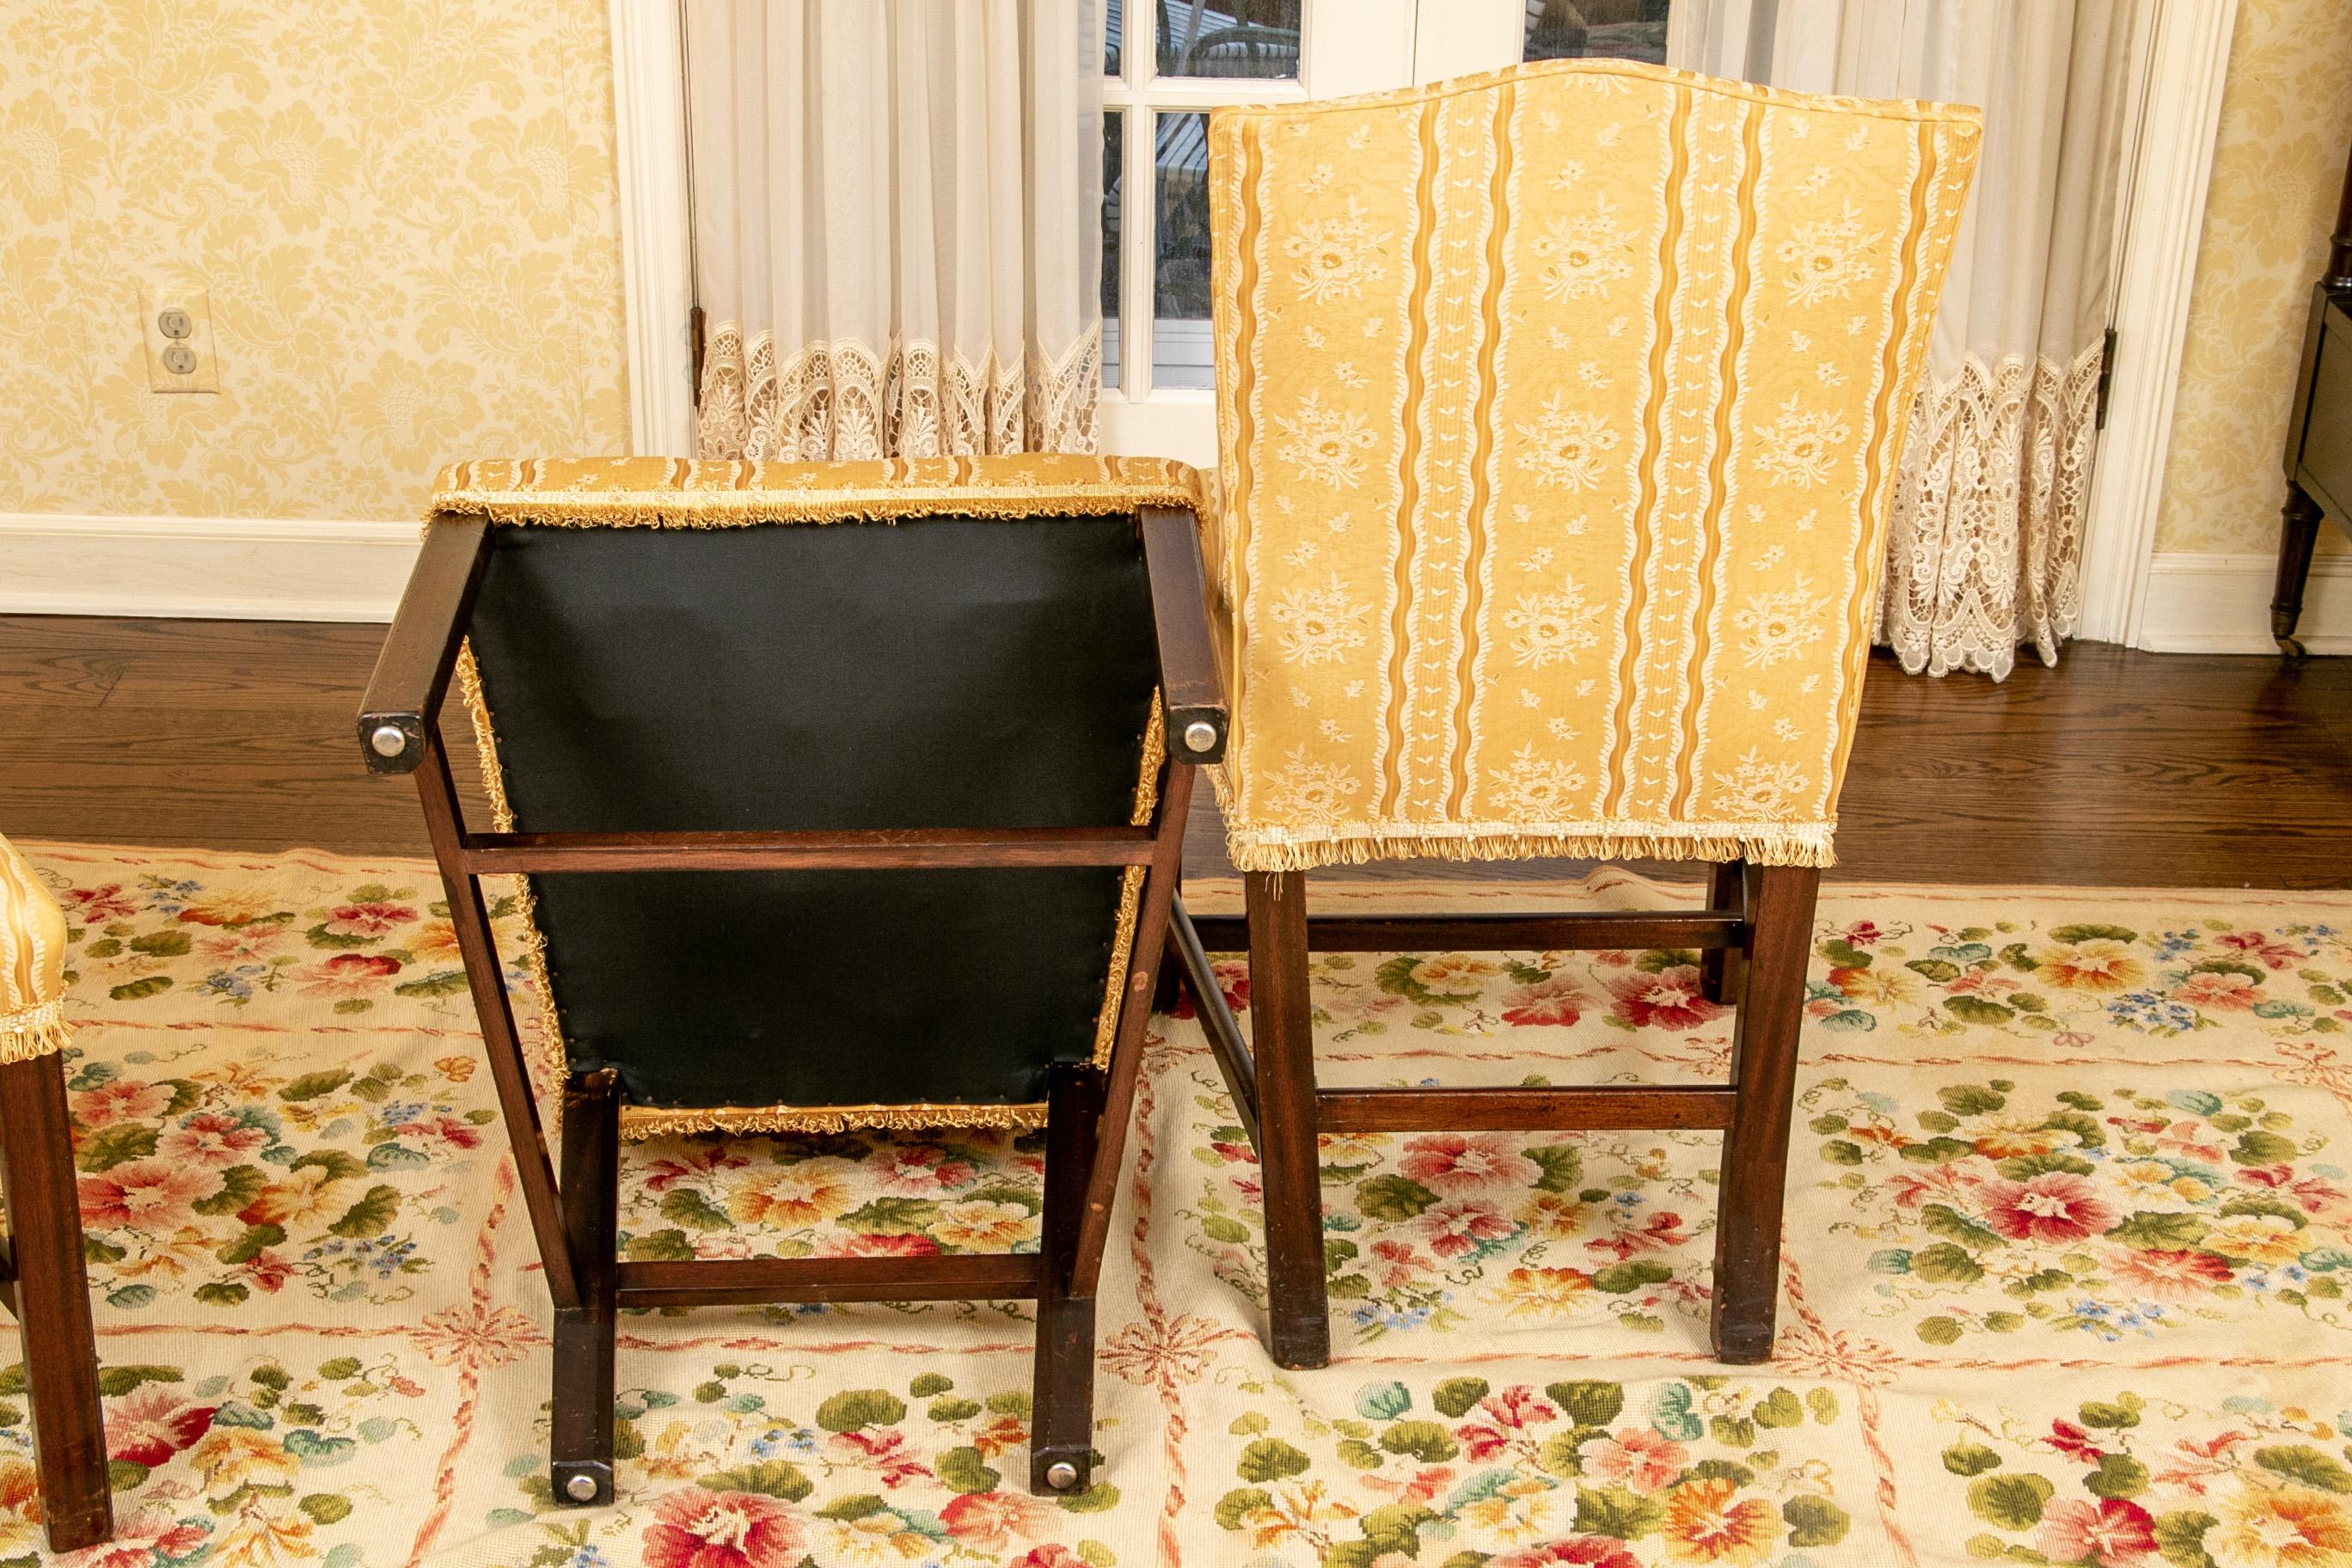 All side chairs. Mahogany frames with square legs and stretchers on all sides. Upholstered in a silky yellow floral stripe fabric. 

Condition: Good condition with a few spots to the seats, some expected scrapes to the legs.